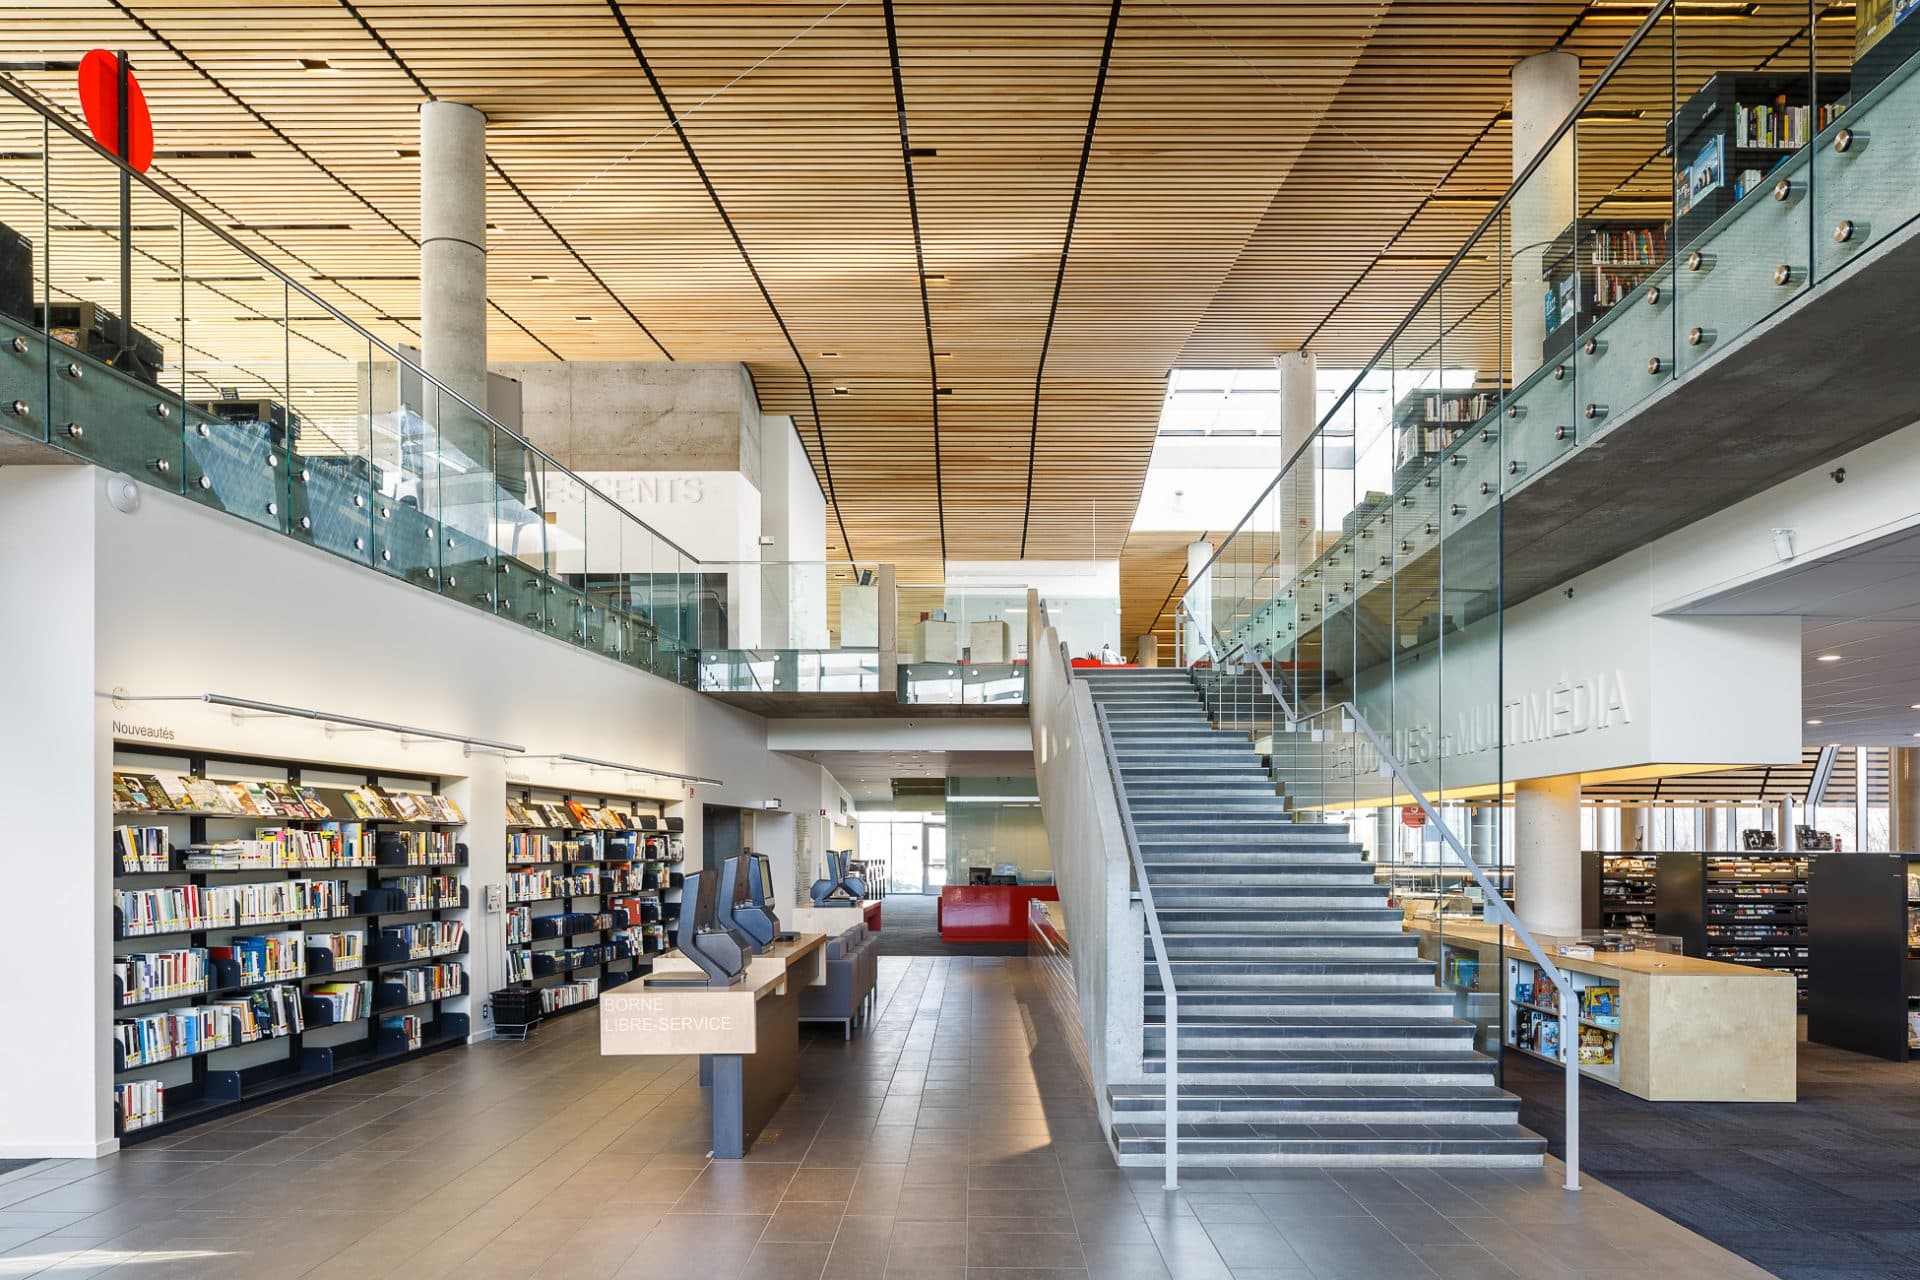 Lemay-Architecture-Bibliotheque-DuBoise-Montreal-Library-Design-grandplan-DavidBoyer-learning-environments-biophilic-design-3